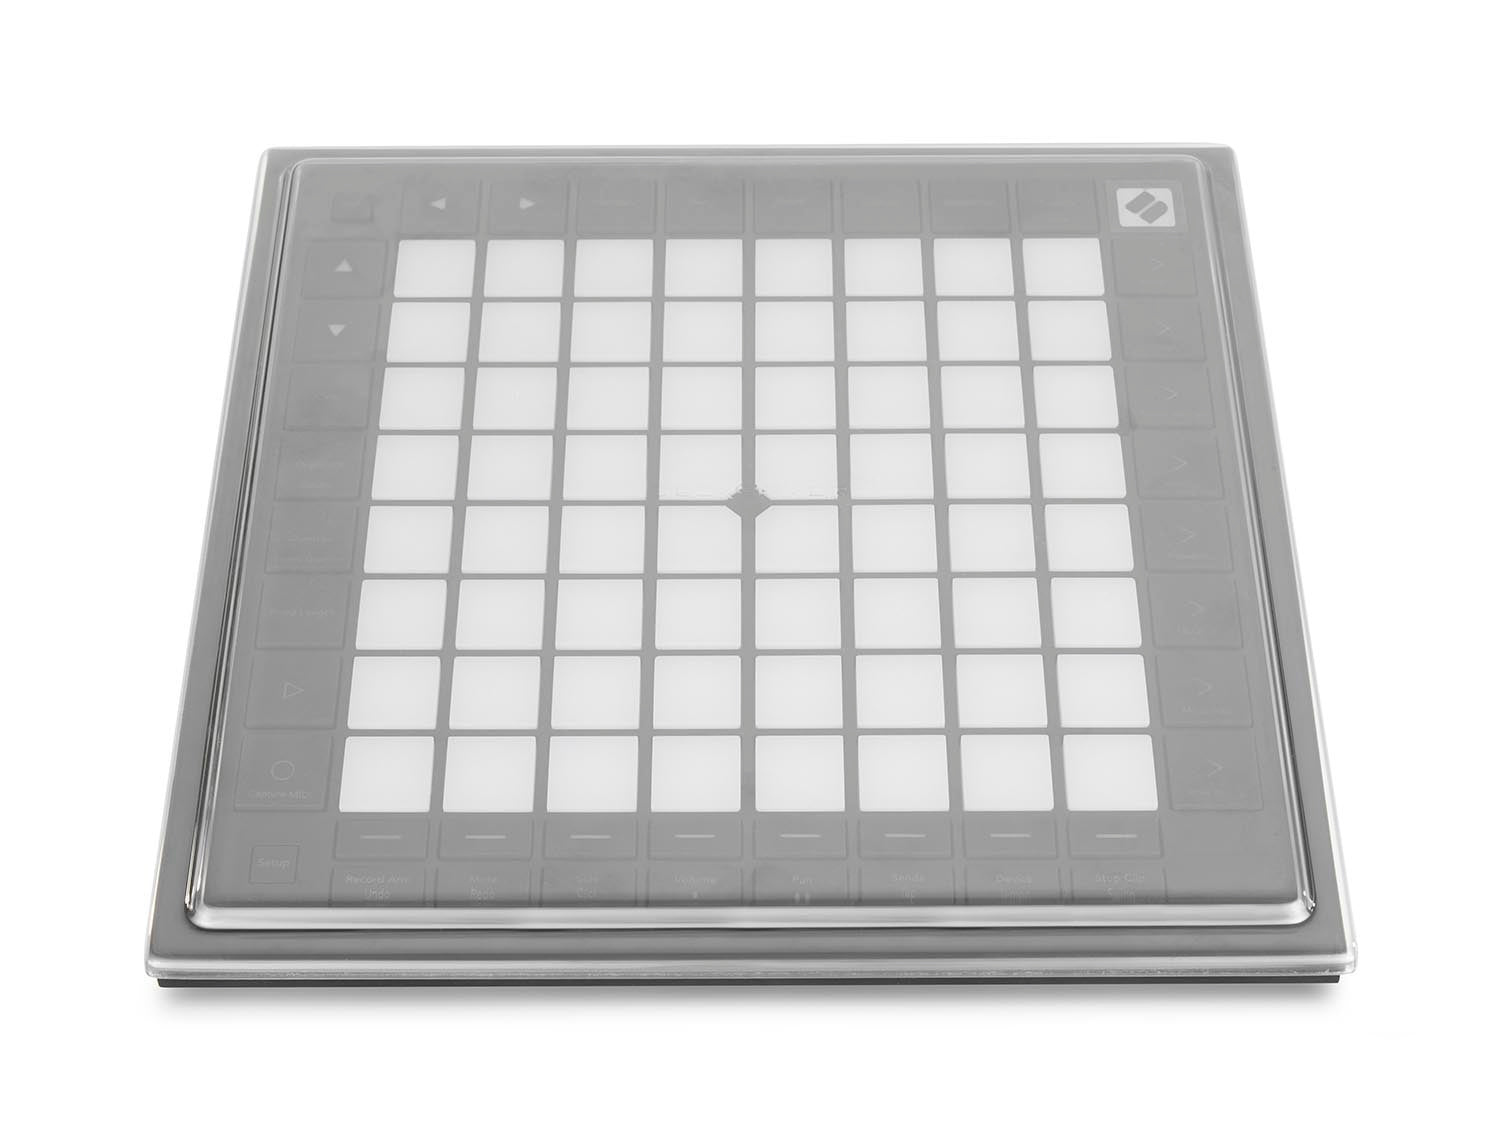 Decksaver DS-PC-LPPMK3 Protection Cover For Novation Launchpad Pro MK3 Controller - Hollywood DJ